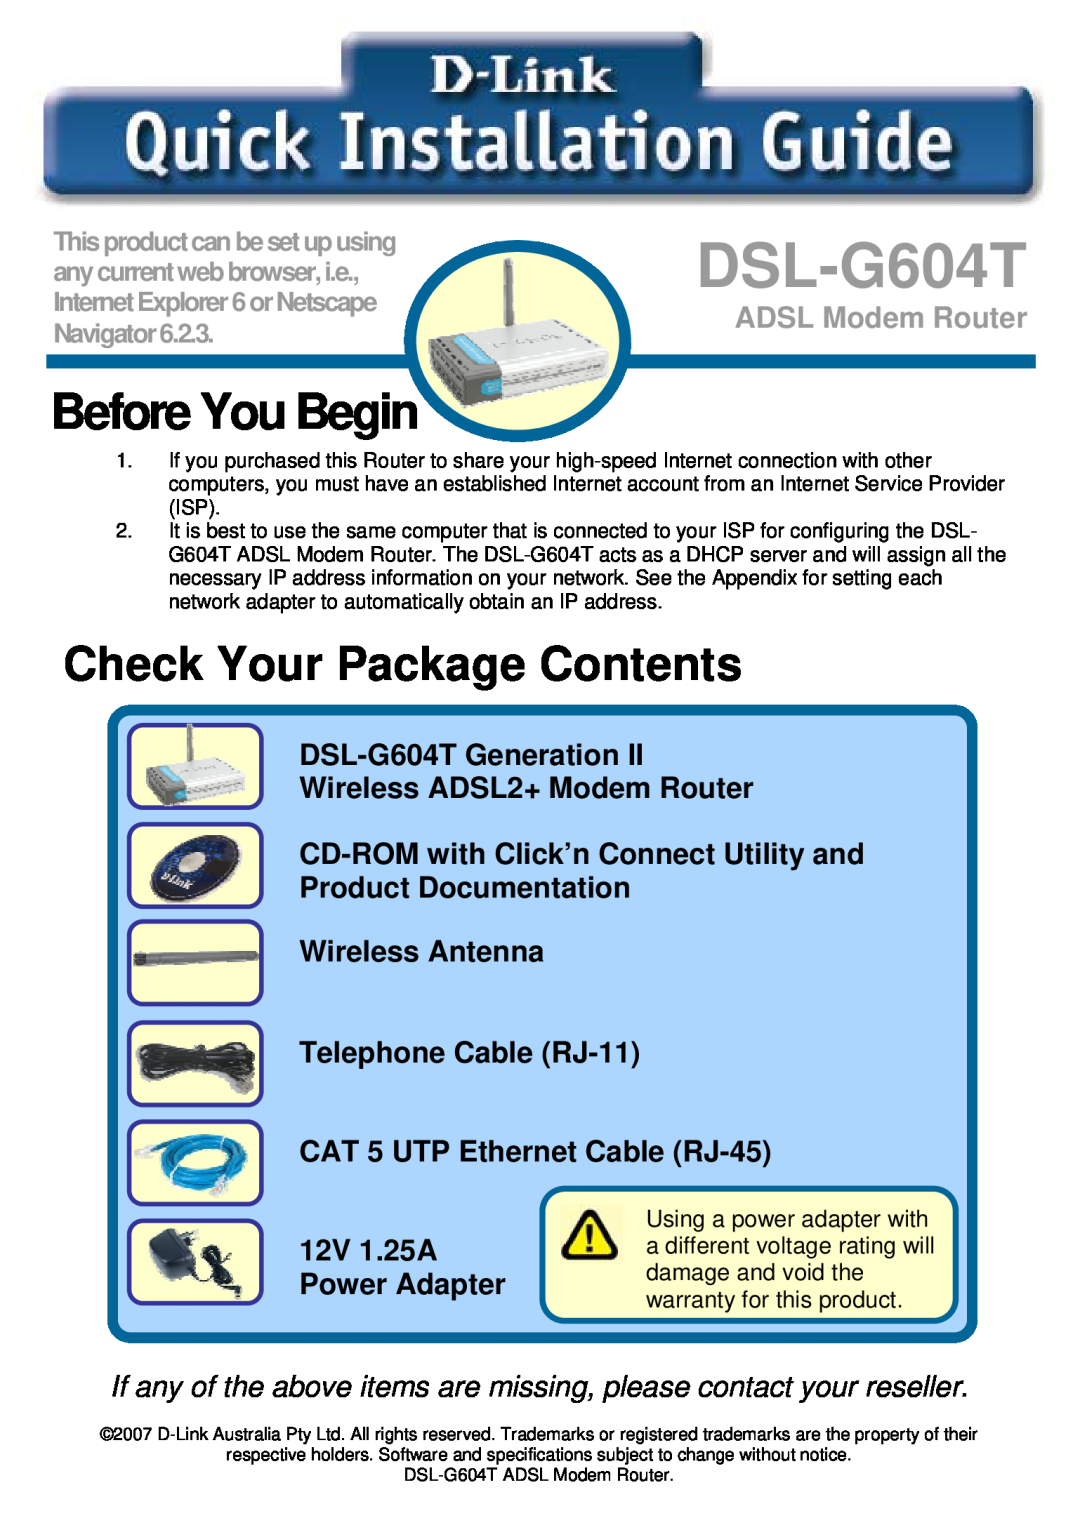 D-Link DSL-G604T specifications Before You Begin, Check Your Package Contents, ADSL Modem Router, 12V 1.25A Power Adapter 